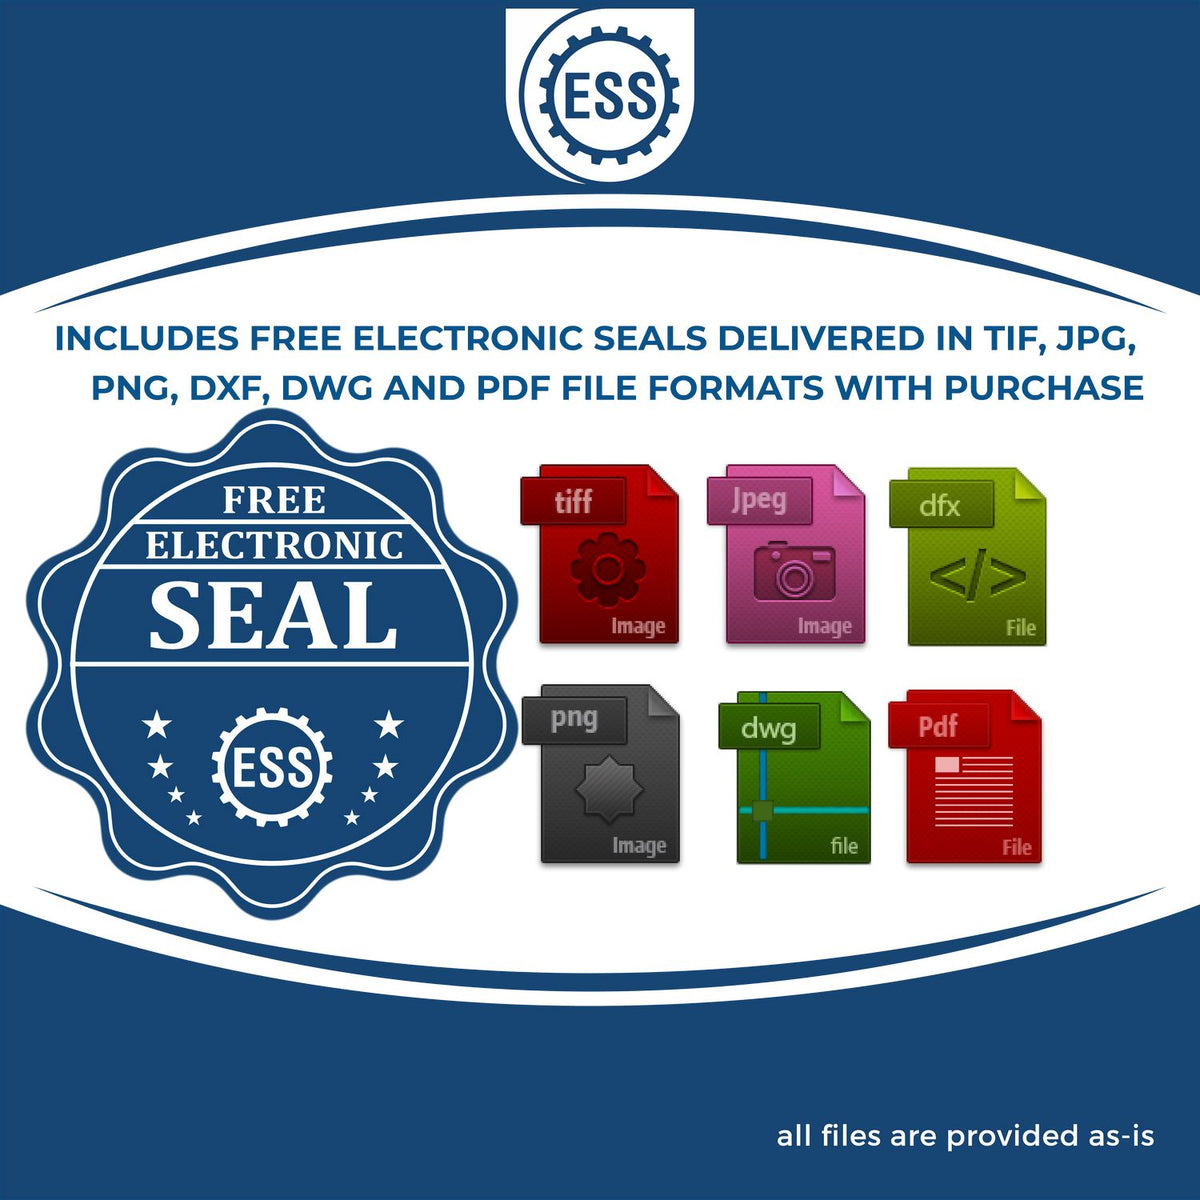 An infographic for the free electronic seal for the Gift New York Land Surveyor Seal illustrating the different file type icons such as DXF, DWG, TIF, JPG and PNG.